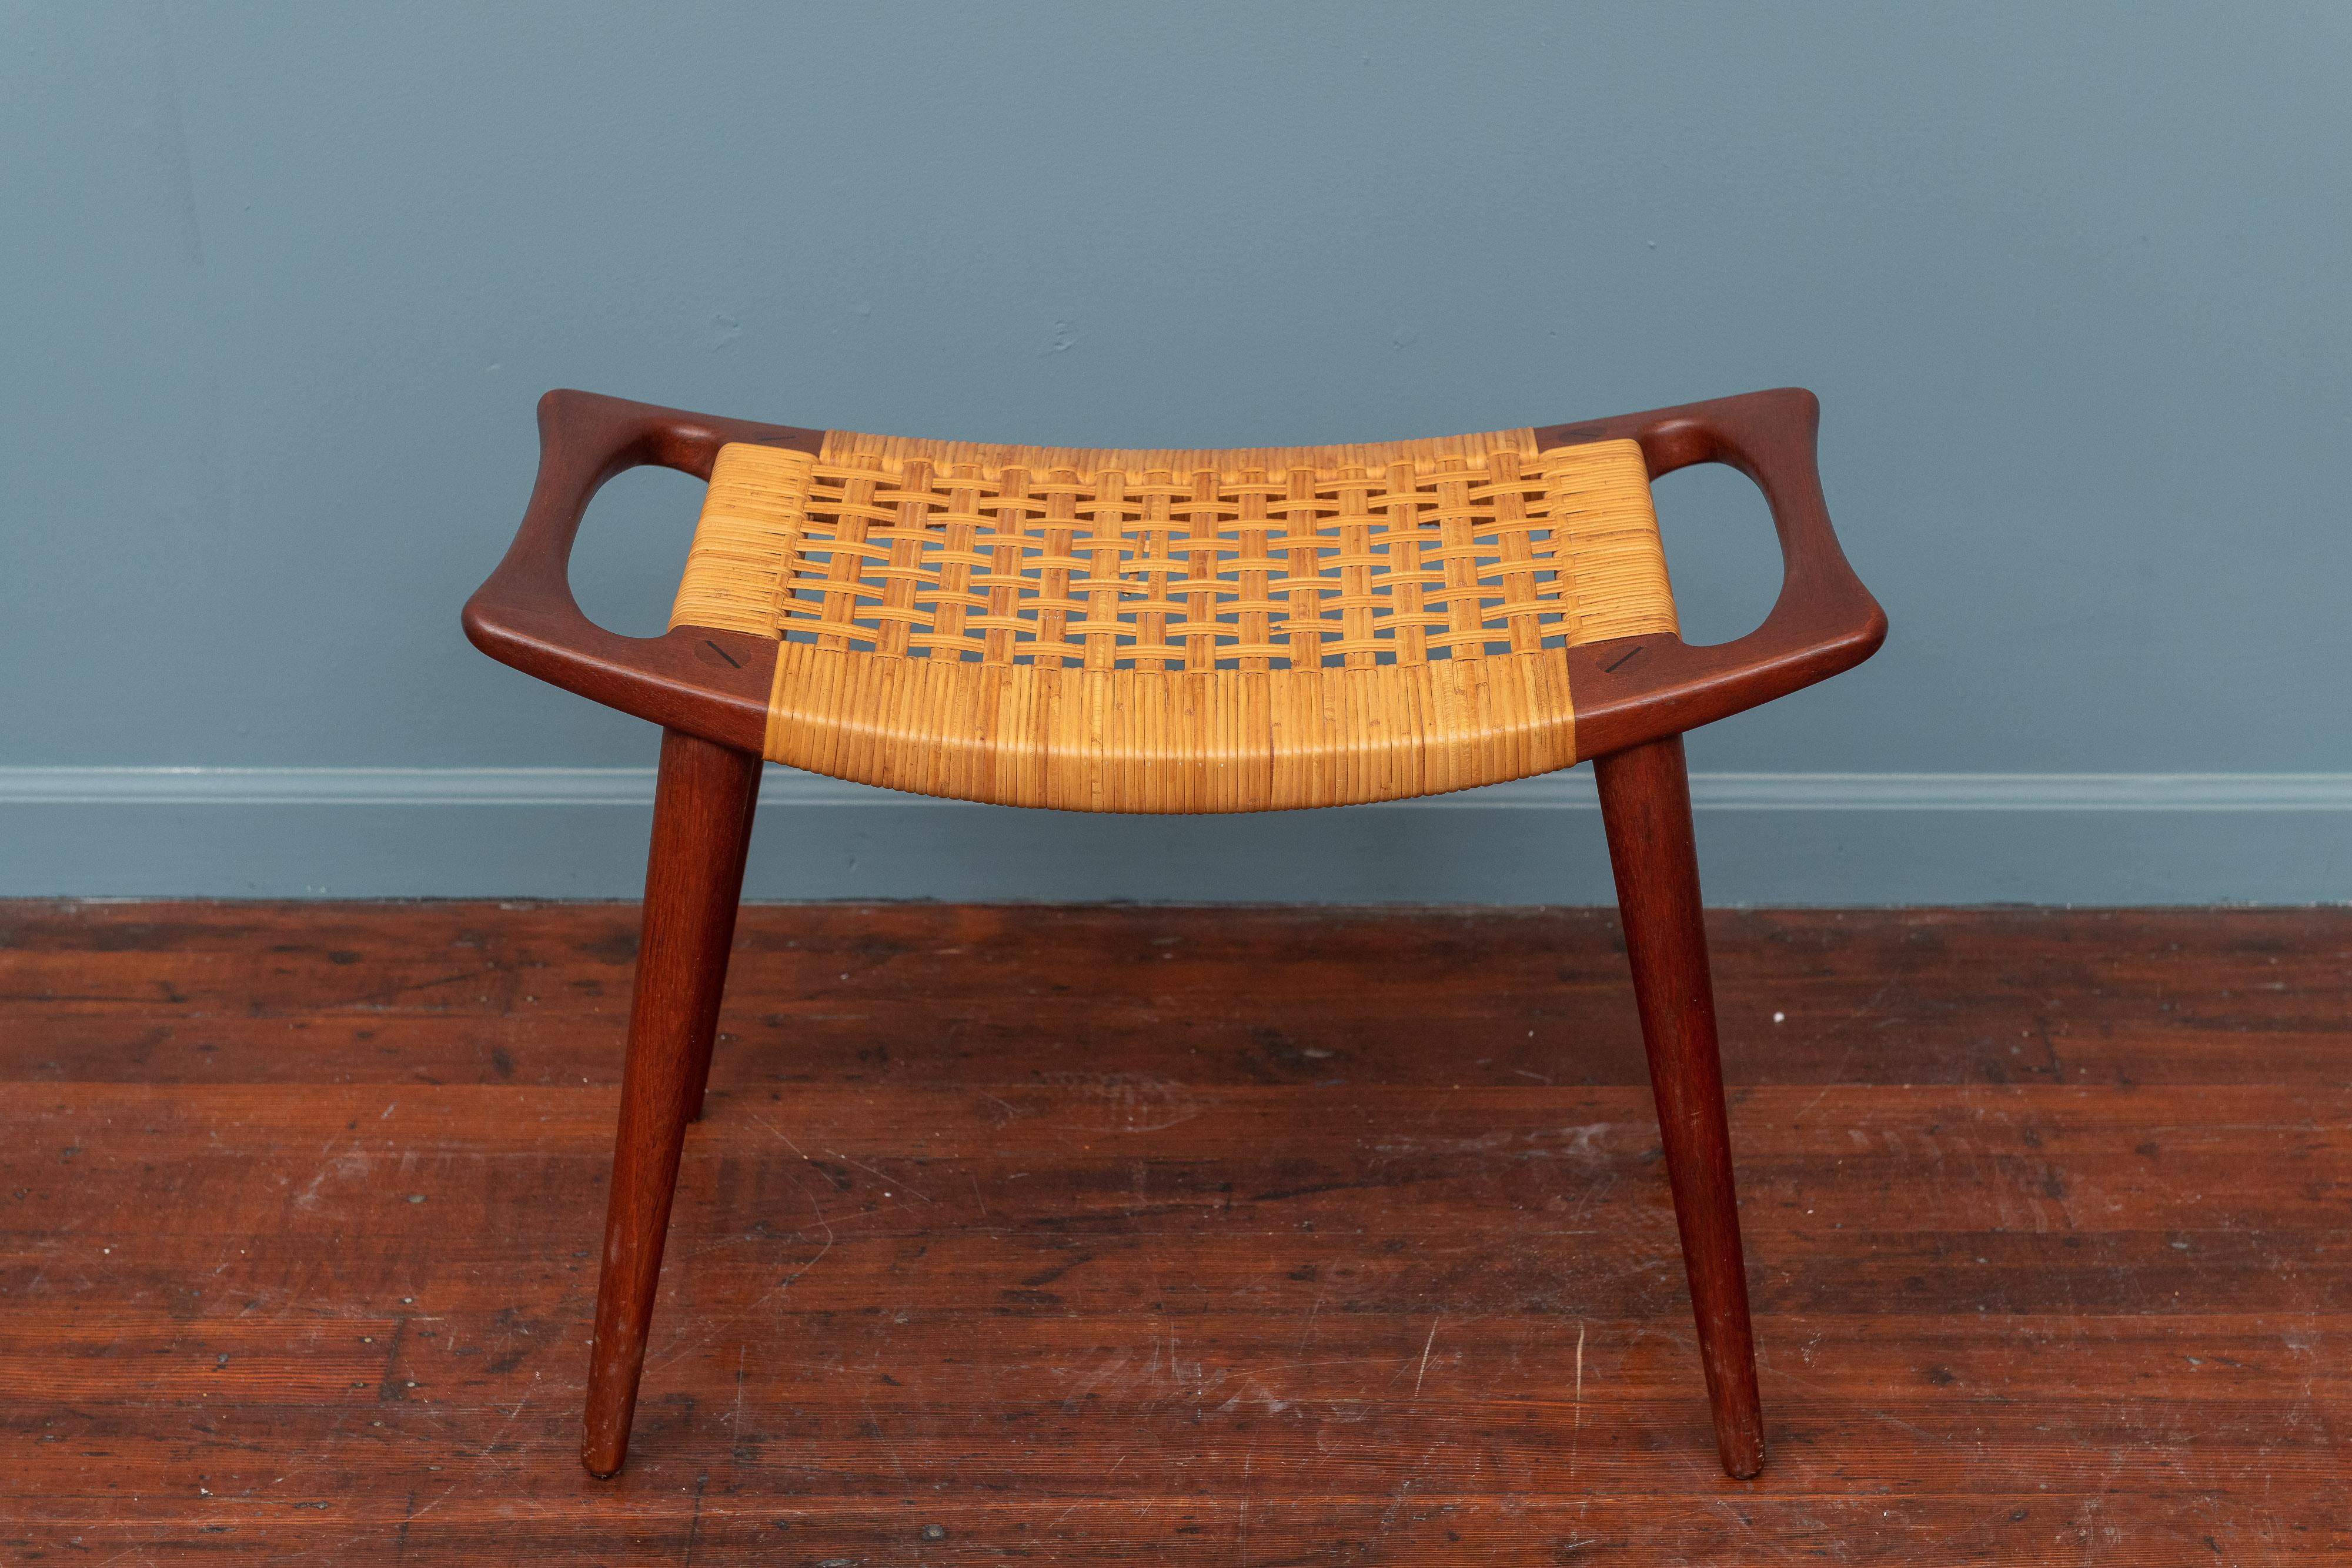 Hans Wegner design stool model JH539 made of sculpted teak with a cane seat, labeled. In excellent original condition, with two small breaks that have since been professionally repaired with new strands.